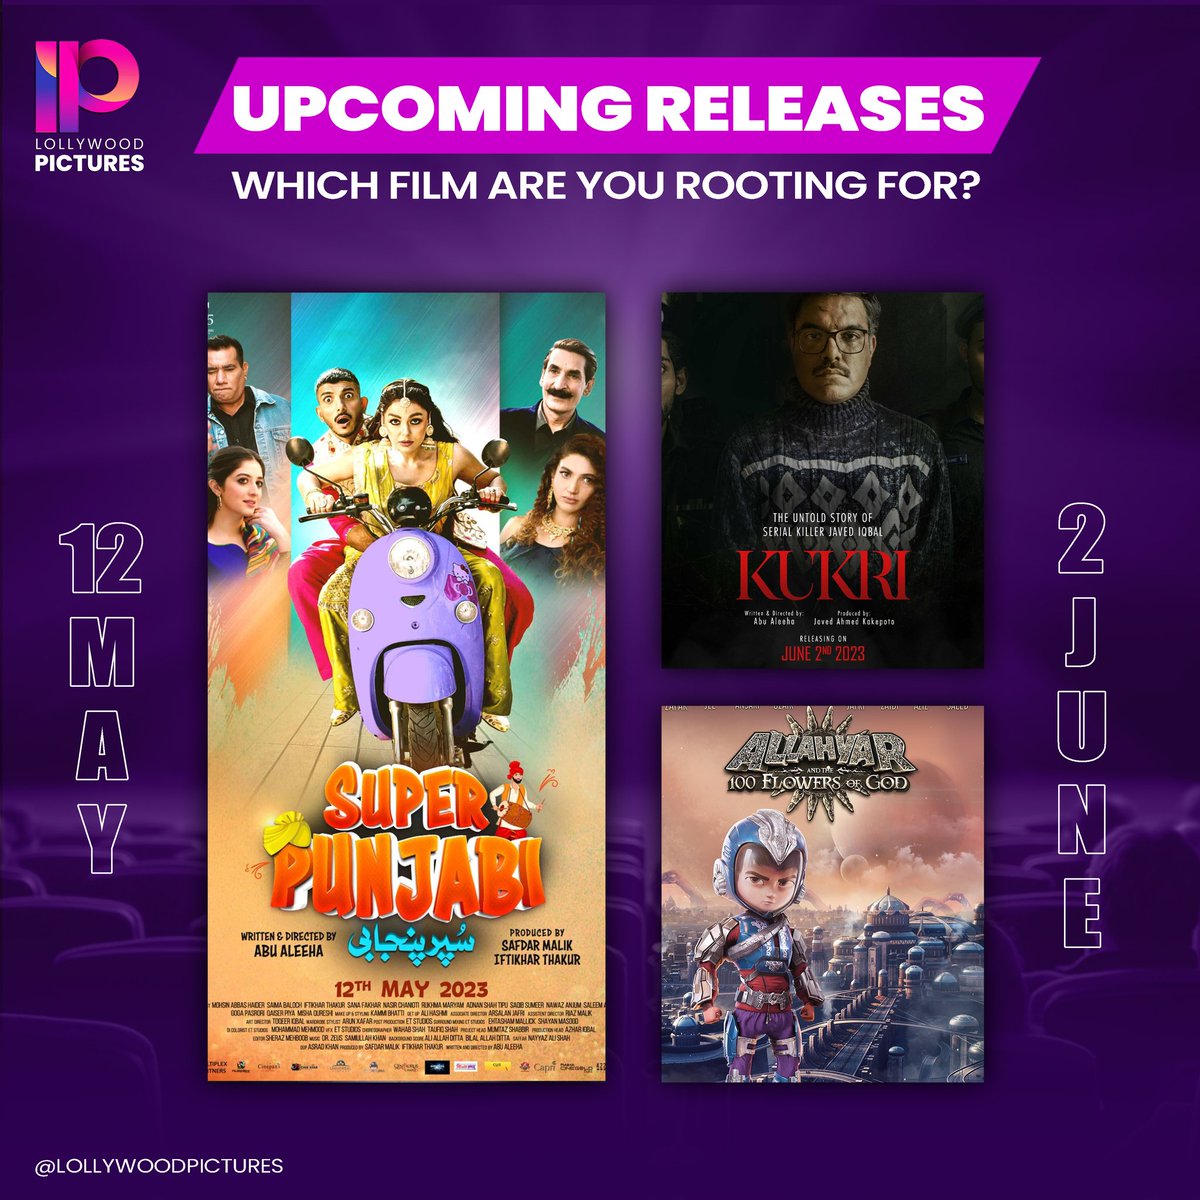 Here's how Films Calendar look like for the next few weeks! 

Which Film are you rooting for? 

#SuperPunjabi (12 May 2023) 
#Kukri (2nd June 2023) 
#Allahyar100FG (2nd June 2023) 

#LollywoodPictures #UpcomingMovies #PakistaniCinema #LollywoodMovies #Entertainment #Celebs